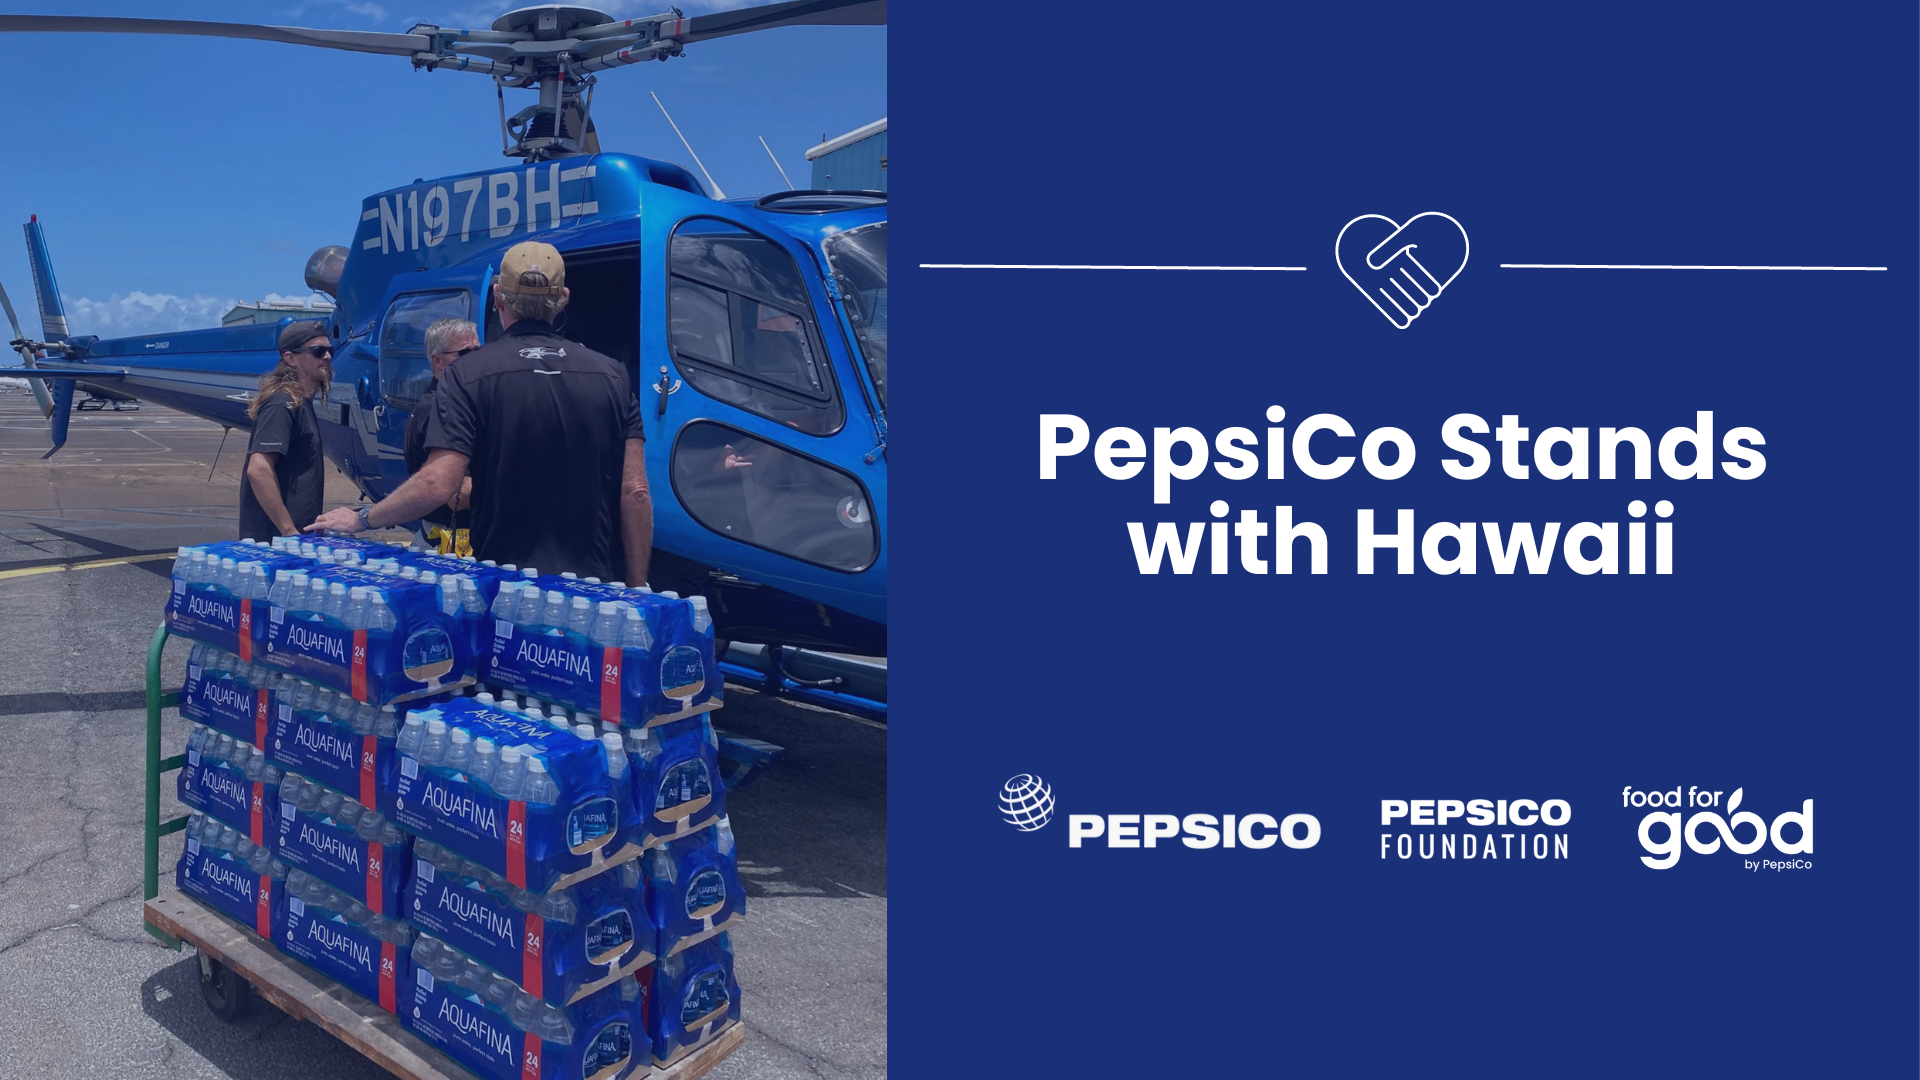 PepsiCo and the PepsiCo Foundation Support Wildfire Relief Efforts in Hawaii